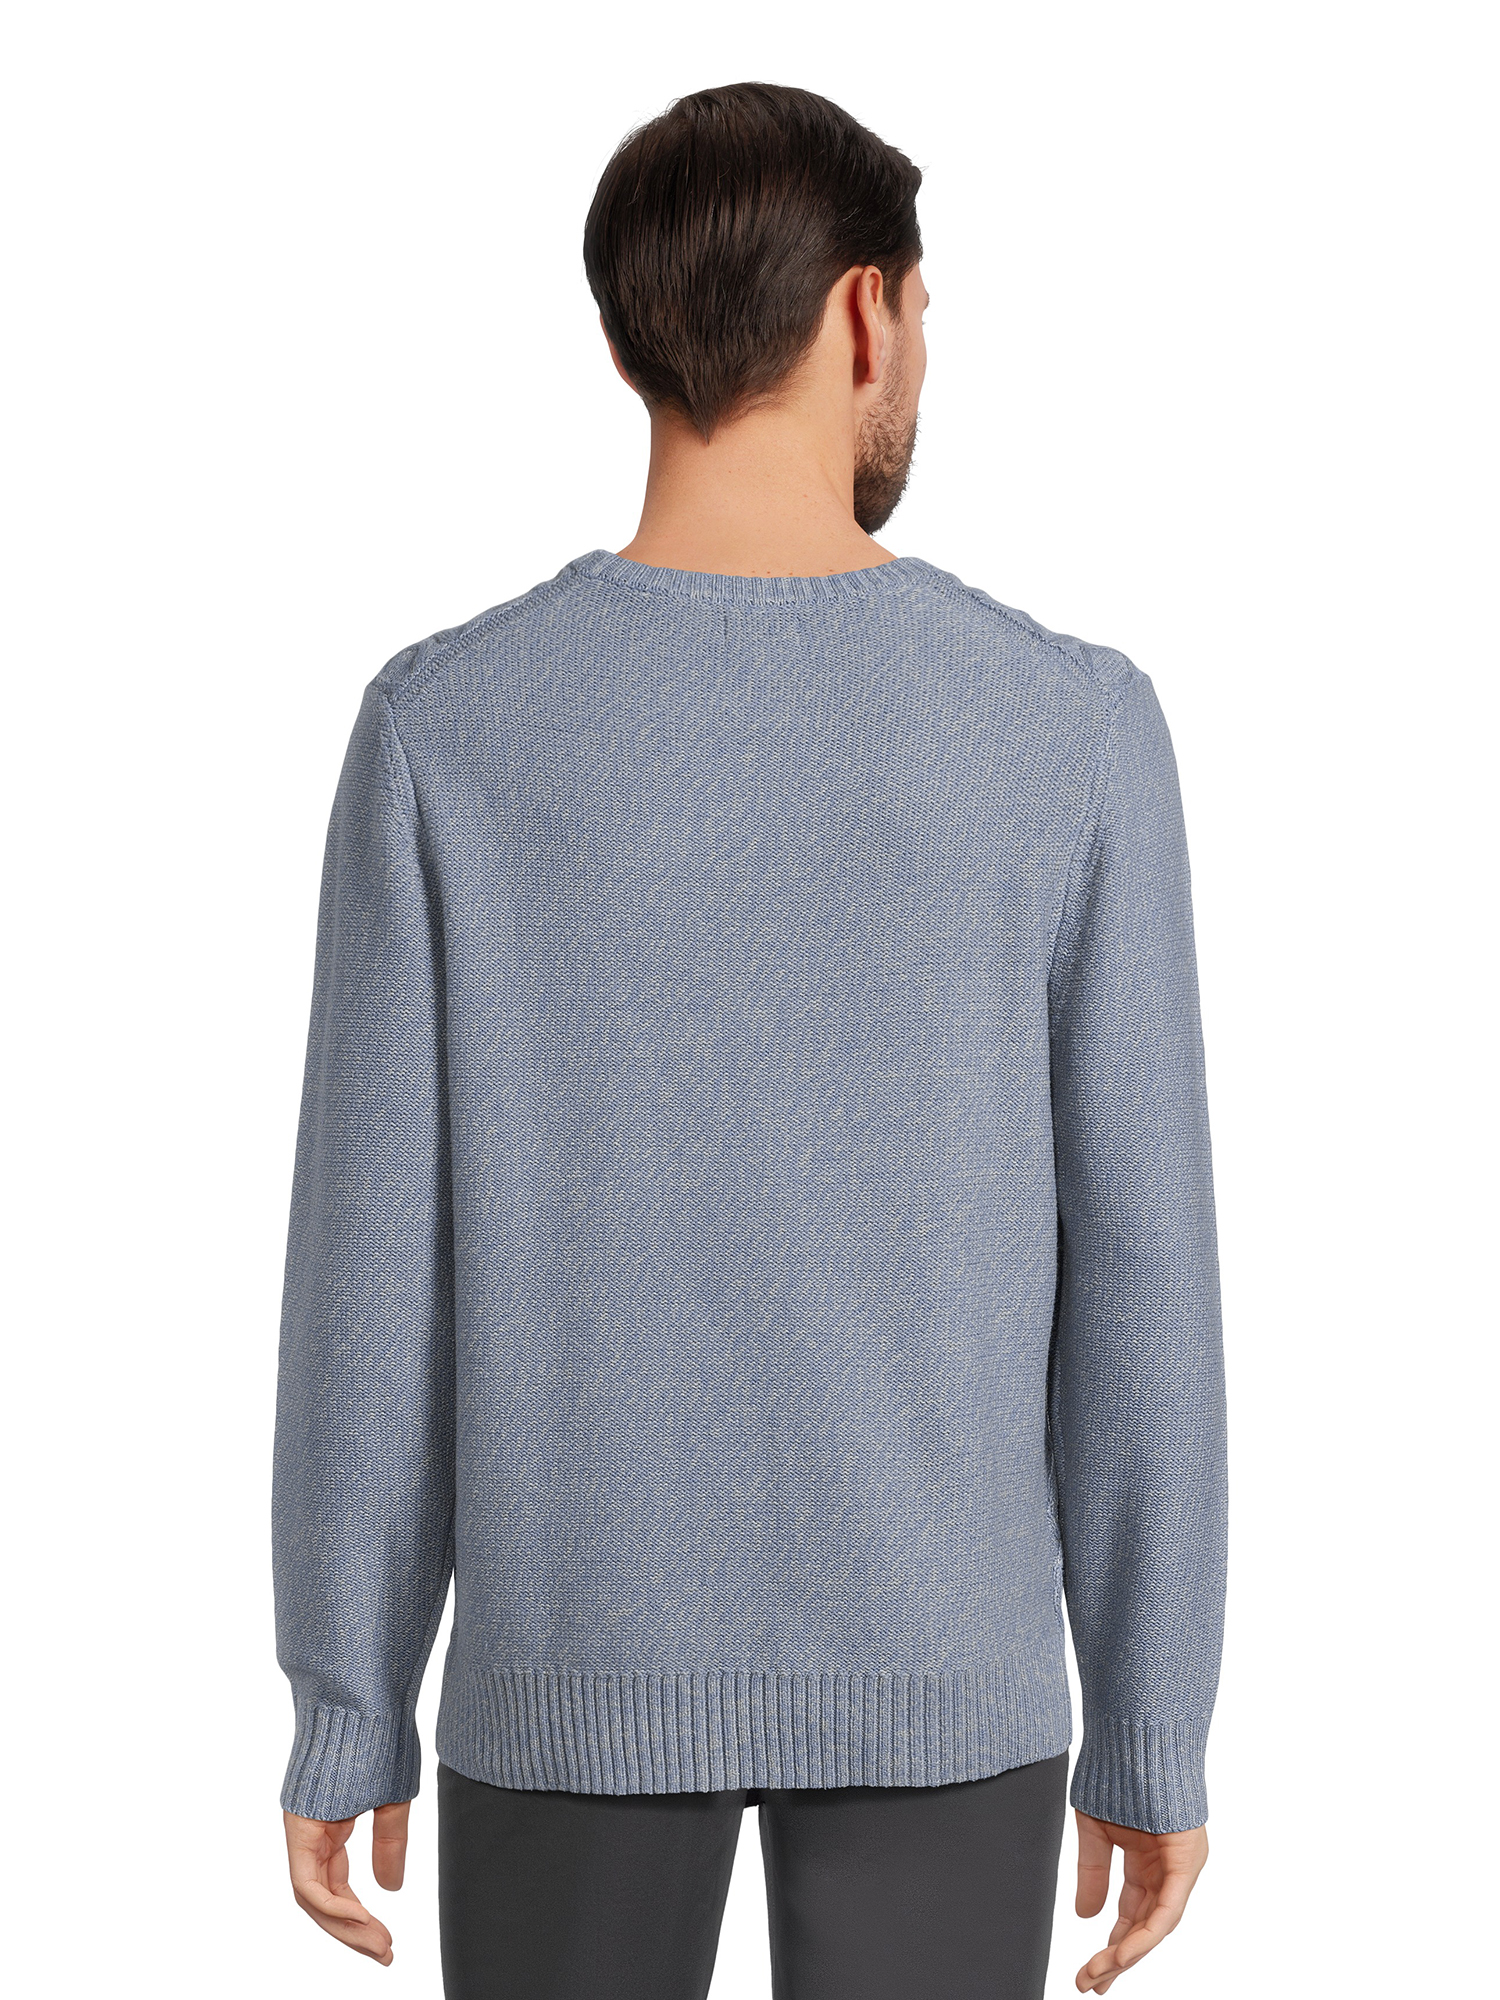 George Men's Marled Sweater with Long Sleeves, Sizes S-3XL - image 3 of 5